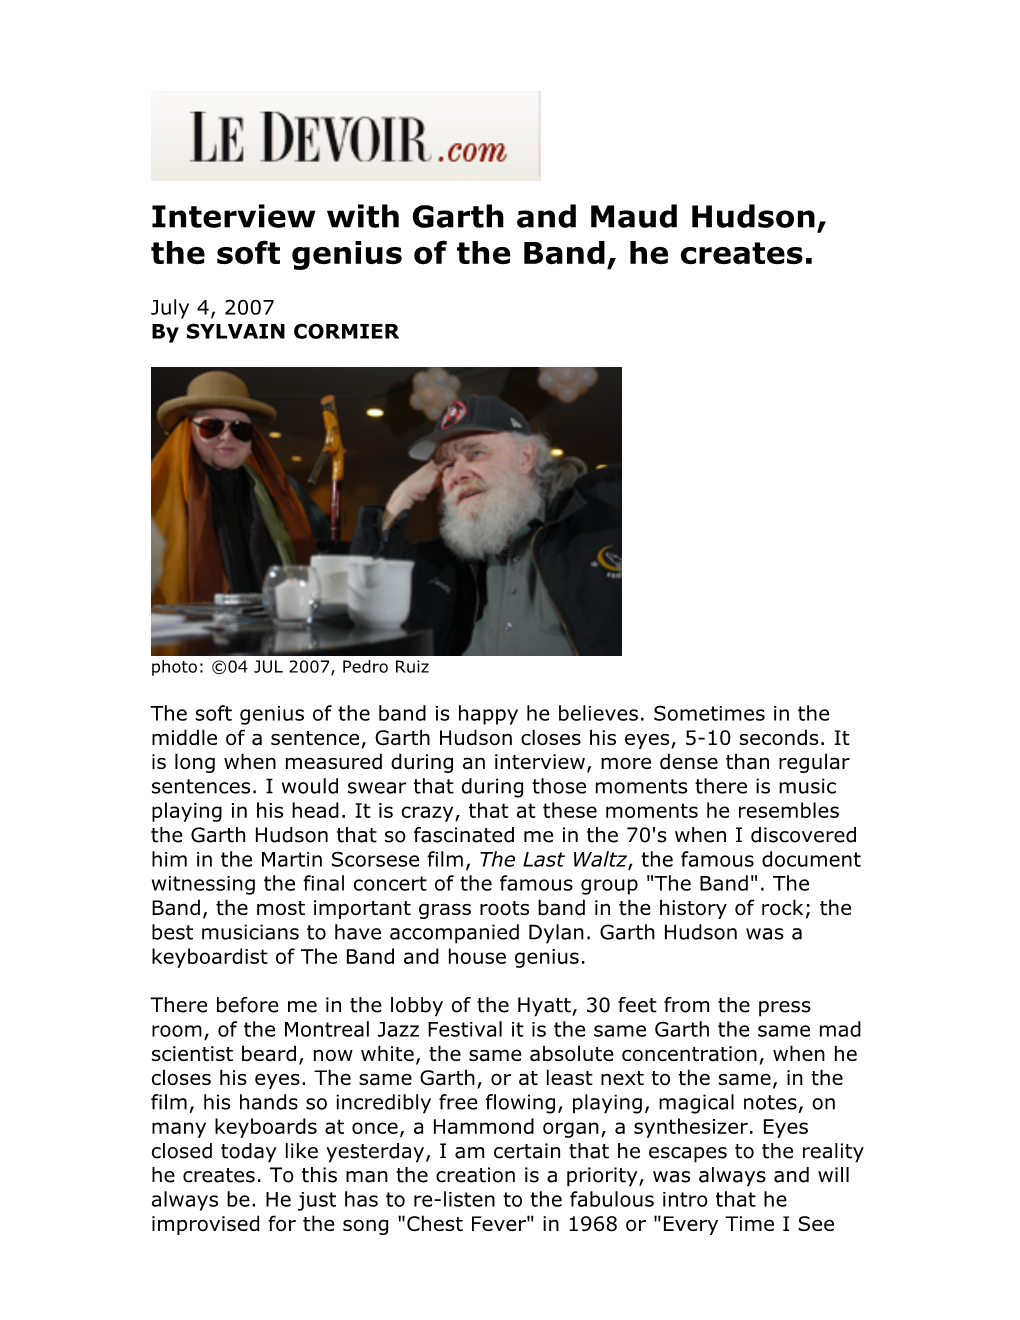 Interview with Garth and Maud Hudson, the Soft Genius of the Band, He Creates